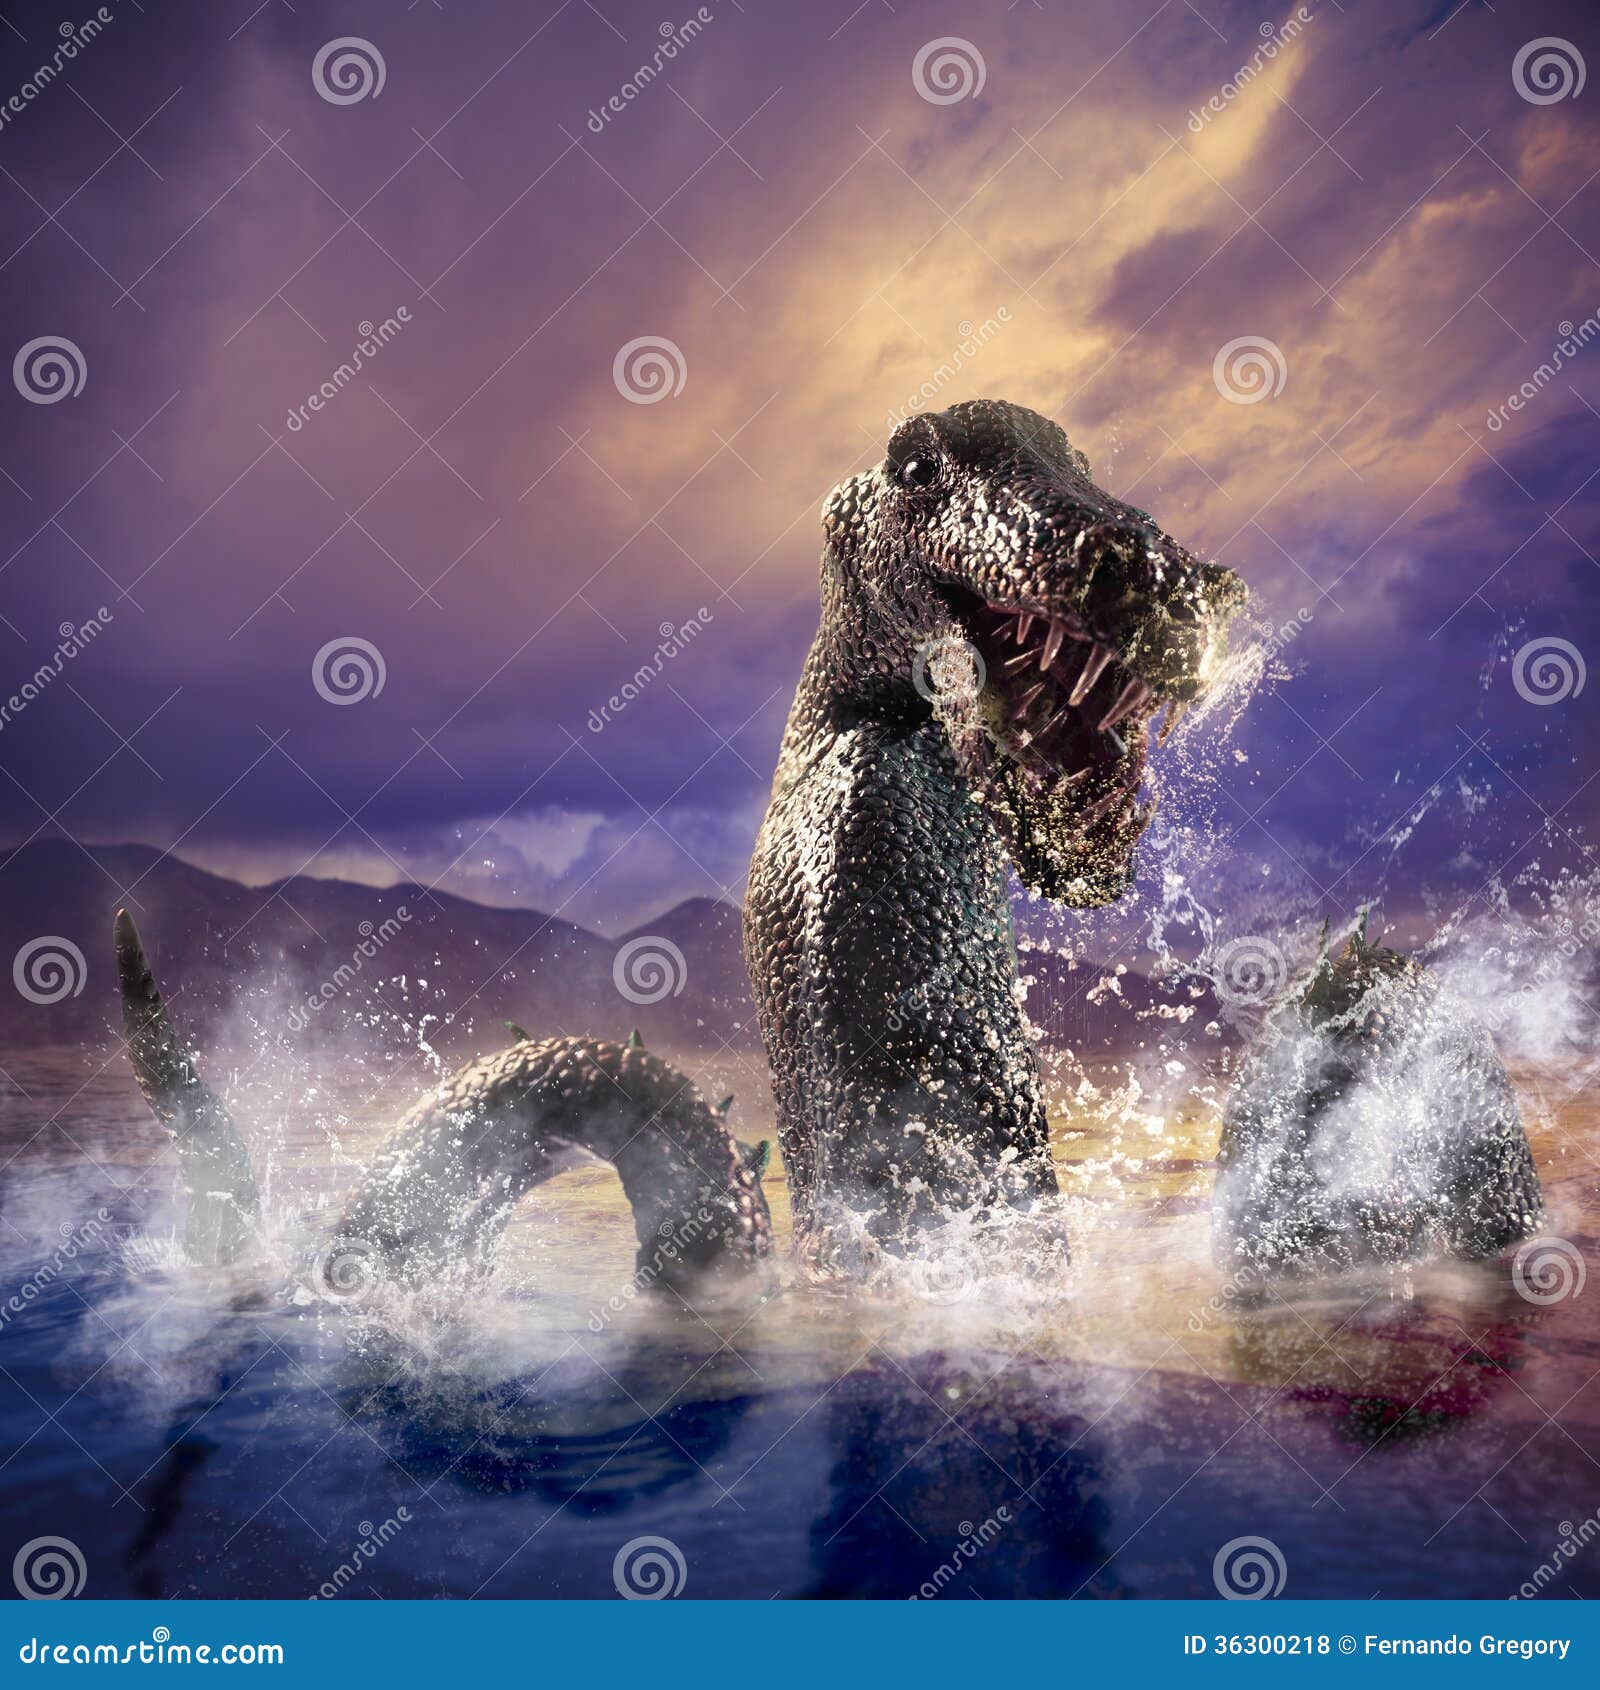 Scary Loch Ness Monster emerging from water. Photo composite of Loch Ness Monster